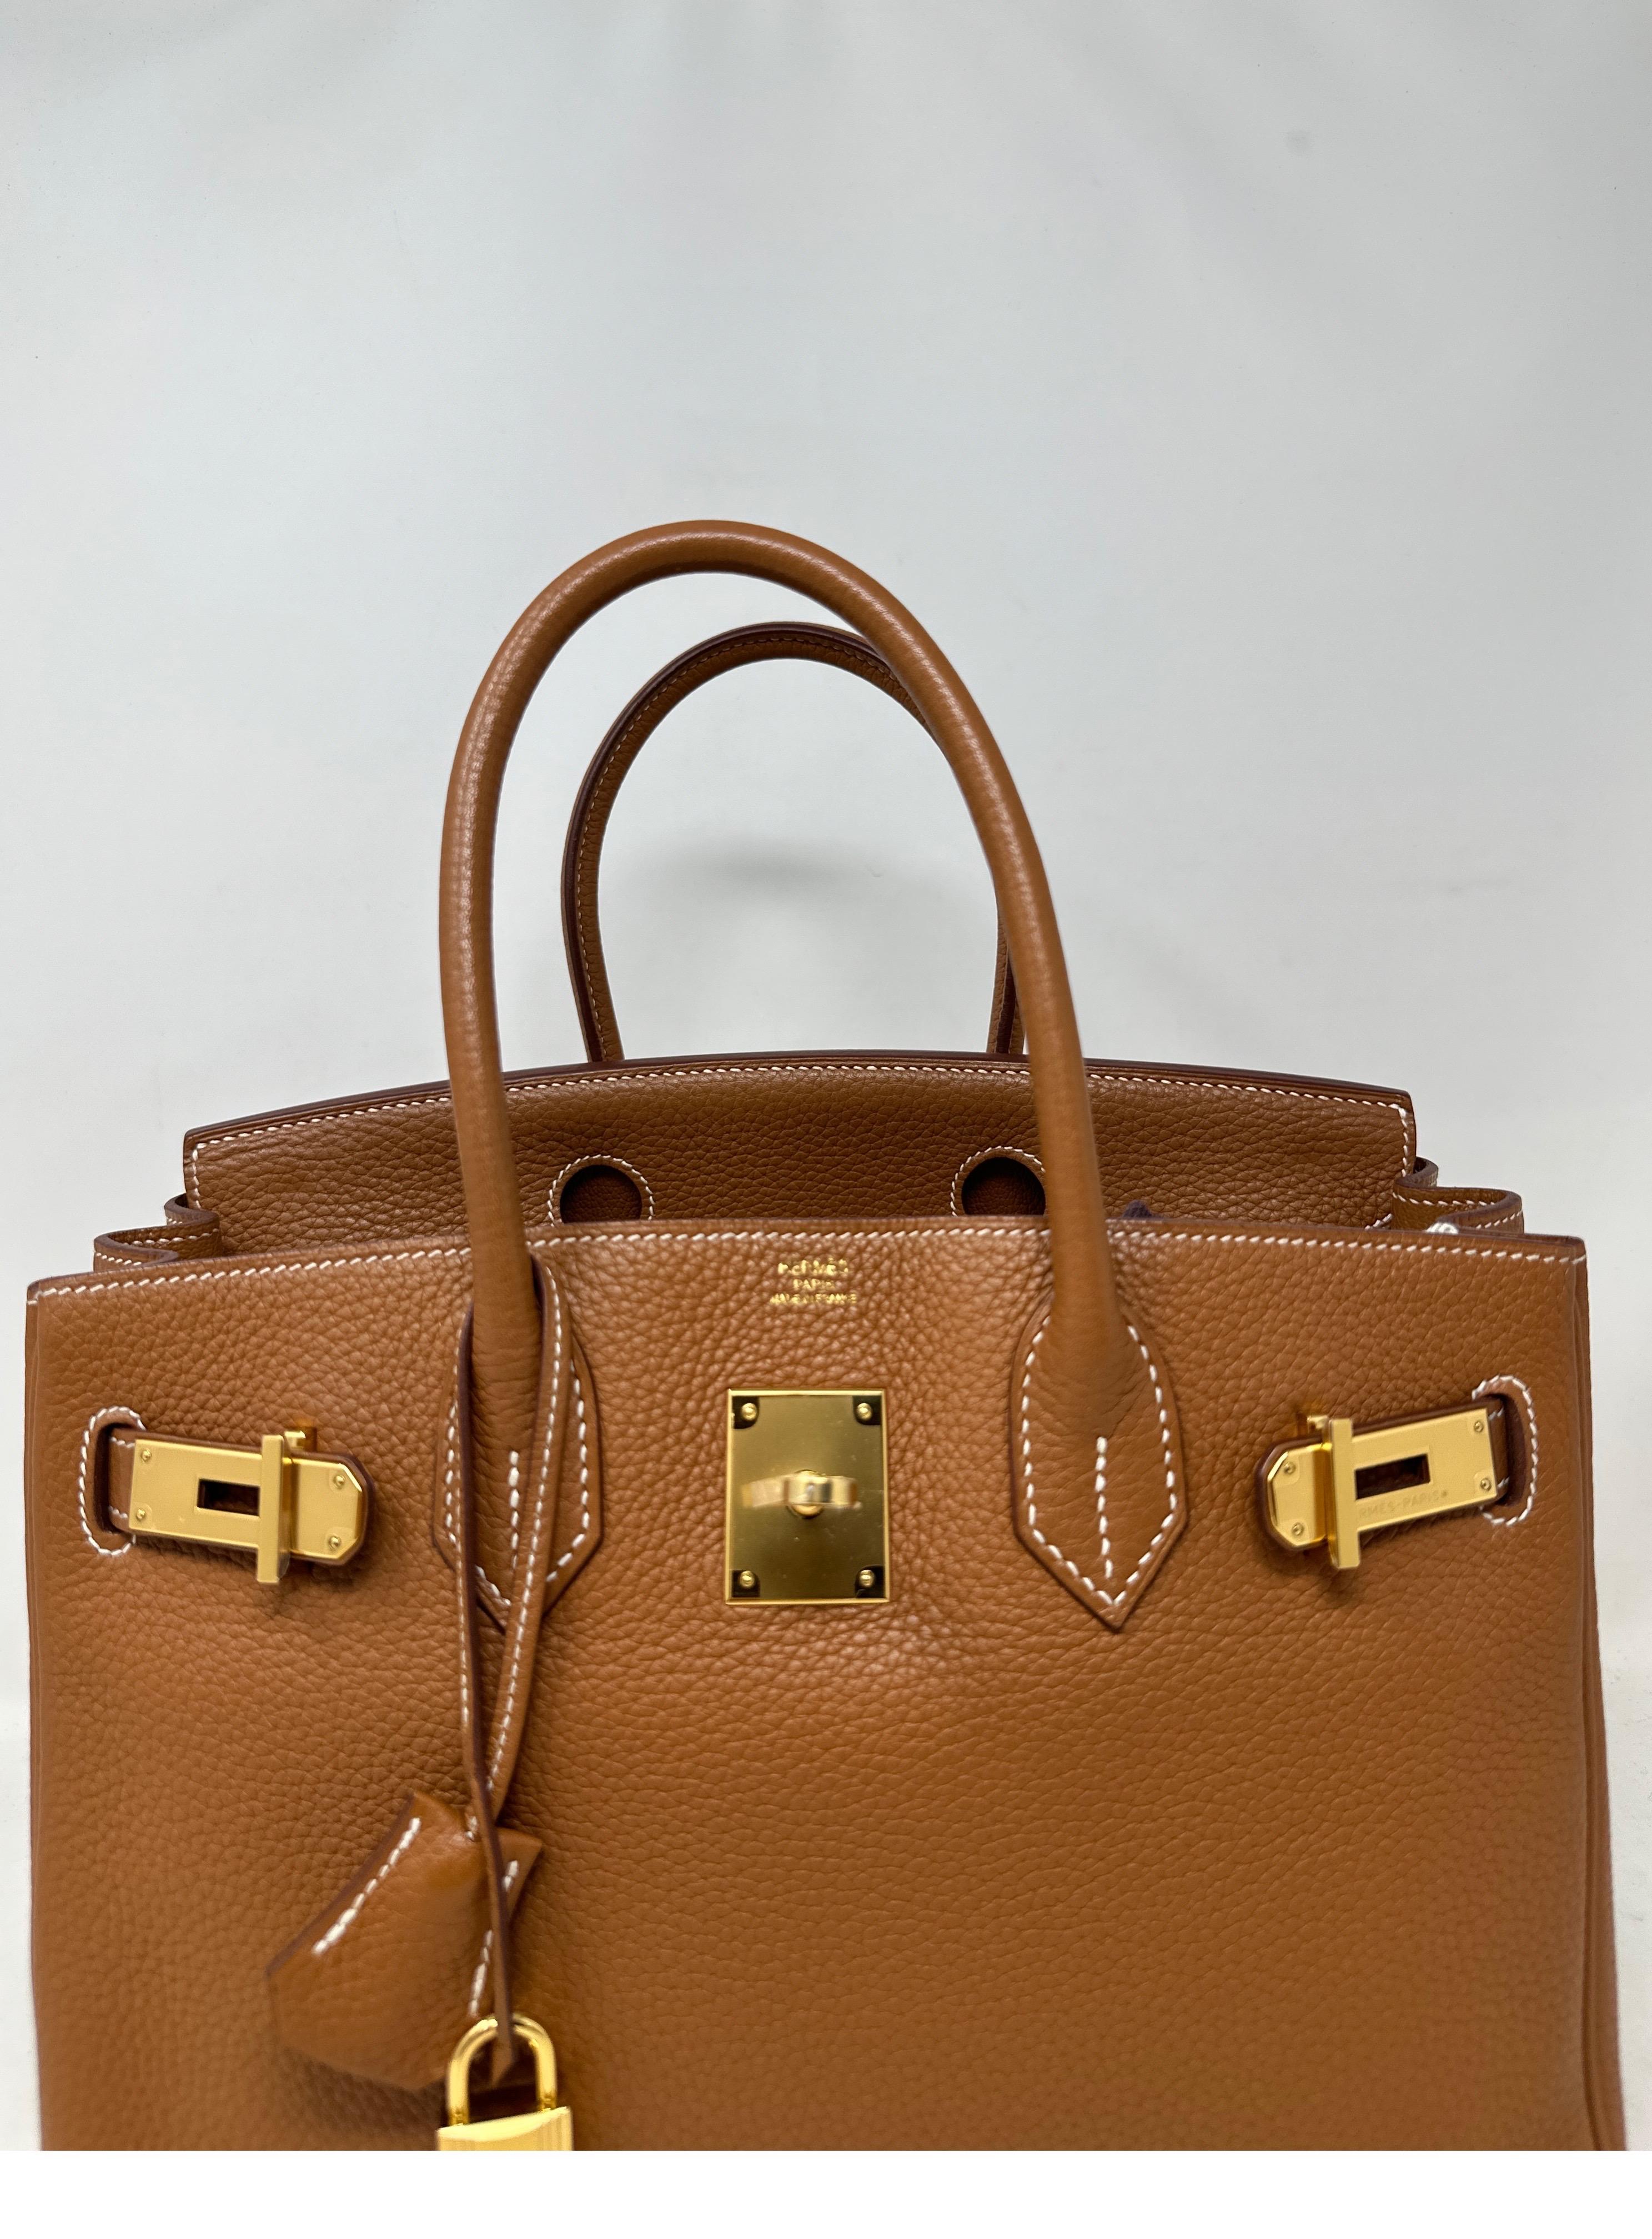 Hermes Gold Birkin 30 Bag  In Good Condition For Sale In Athens, GA